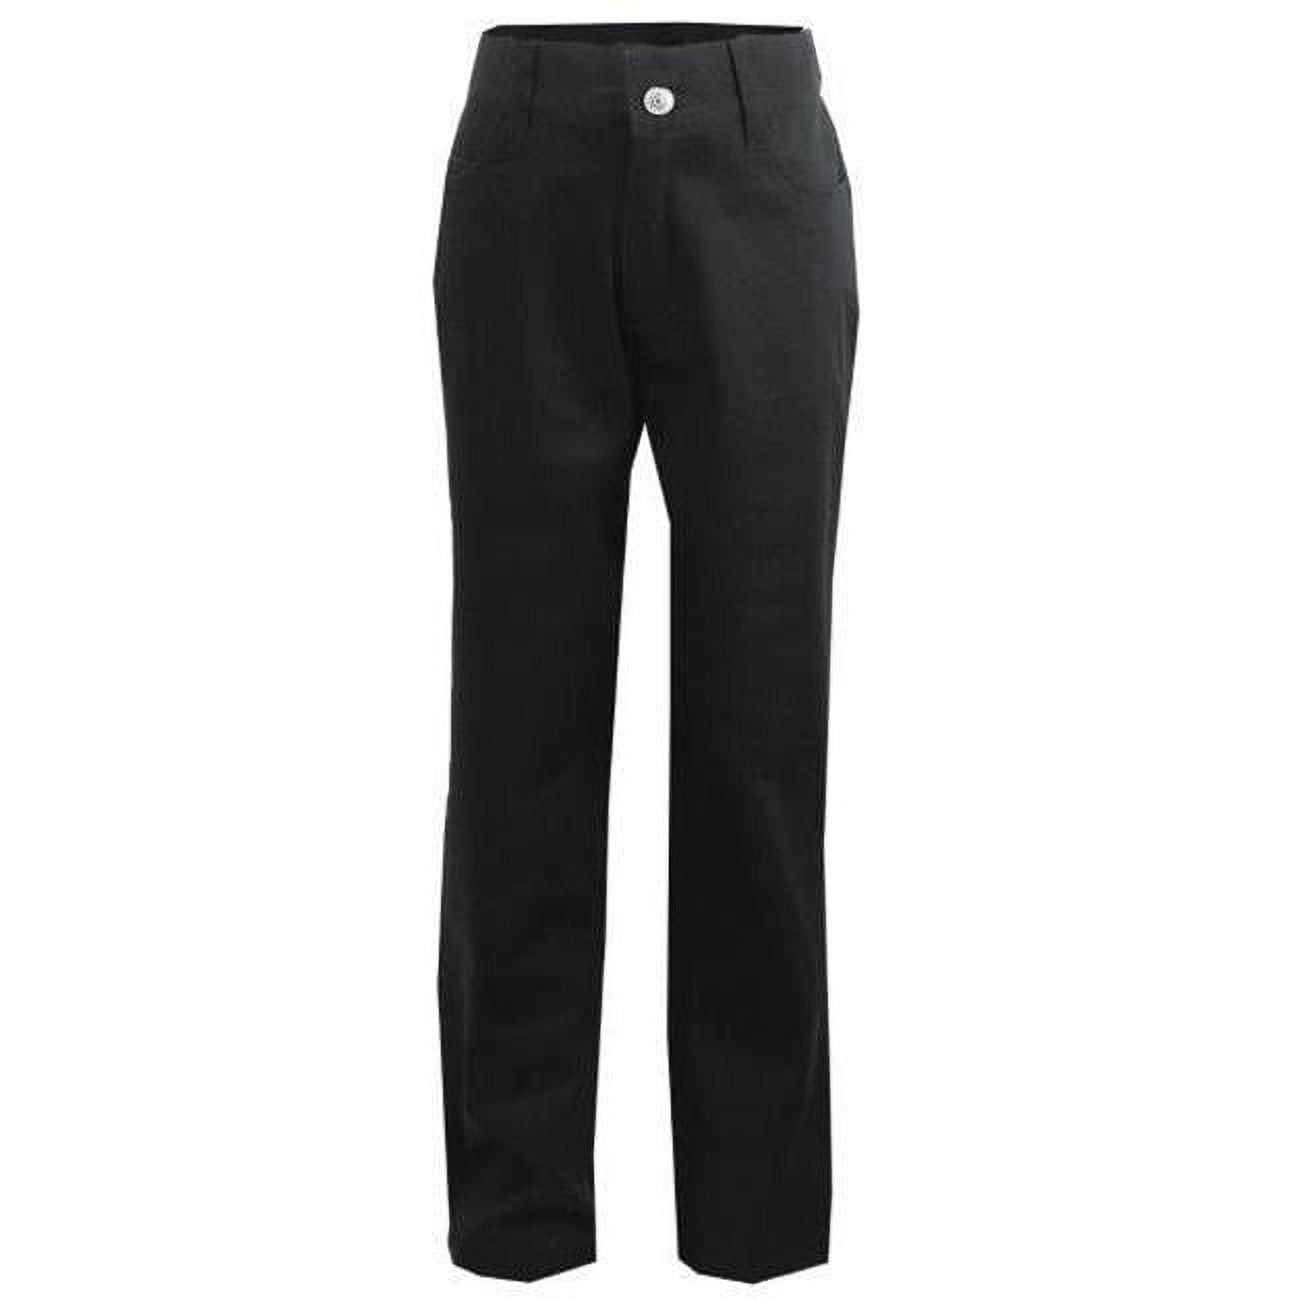 Picture of DDI 2270000 Juniors&apos; Black Fashion Stretch Skinny Pants - Size 5/6 Case of 24